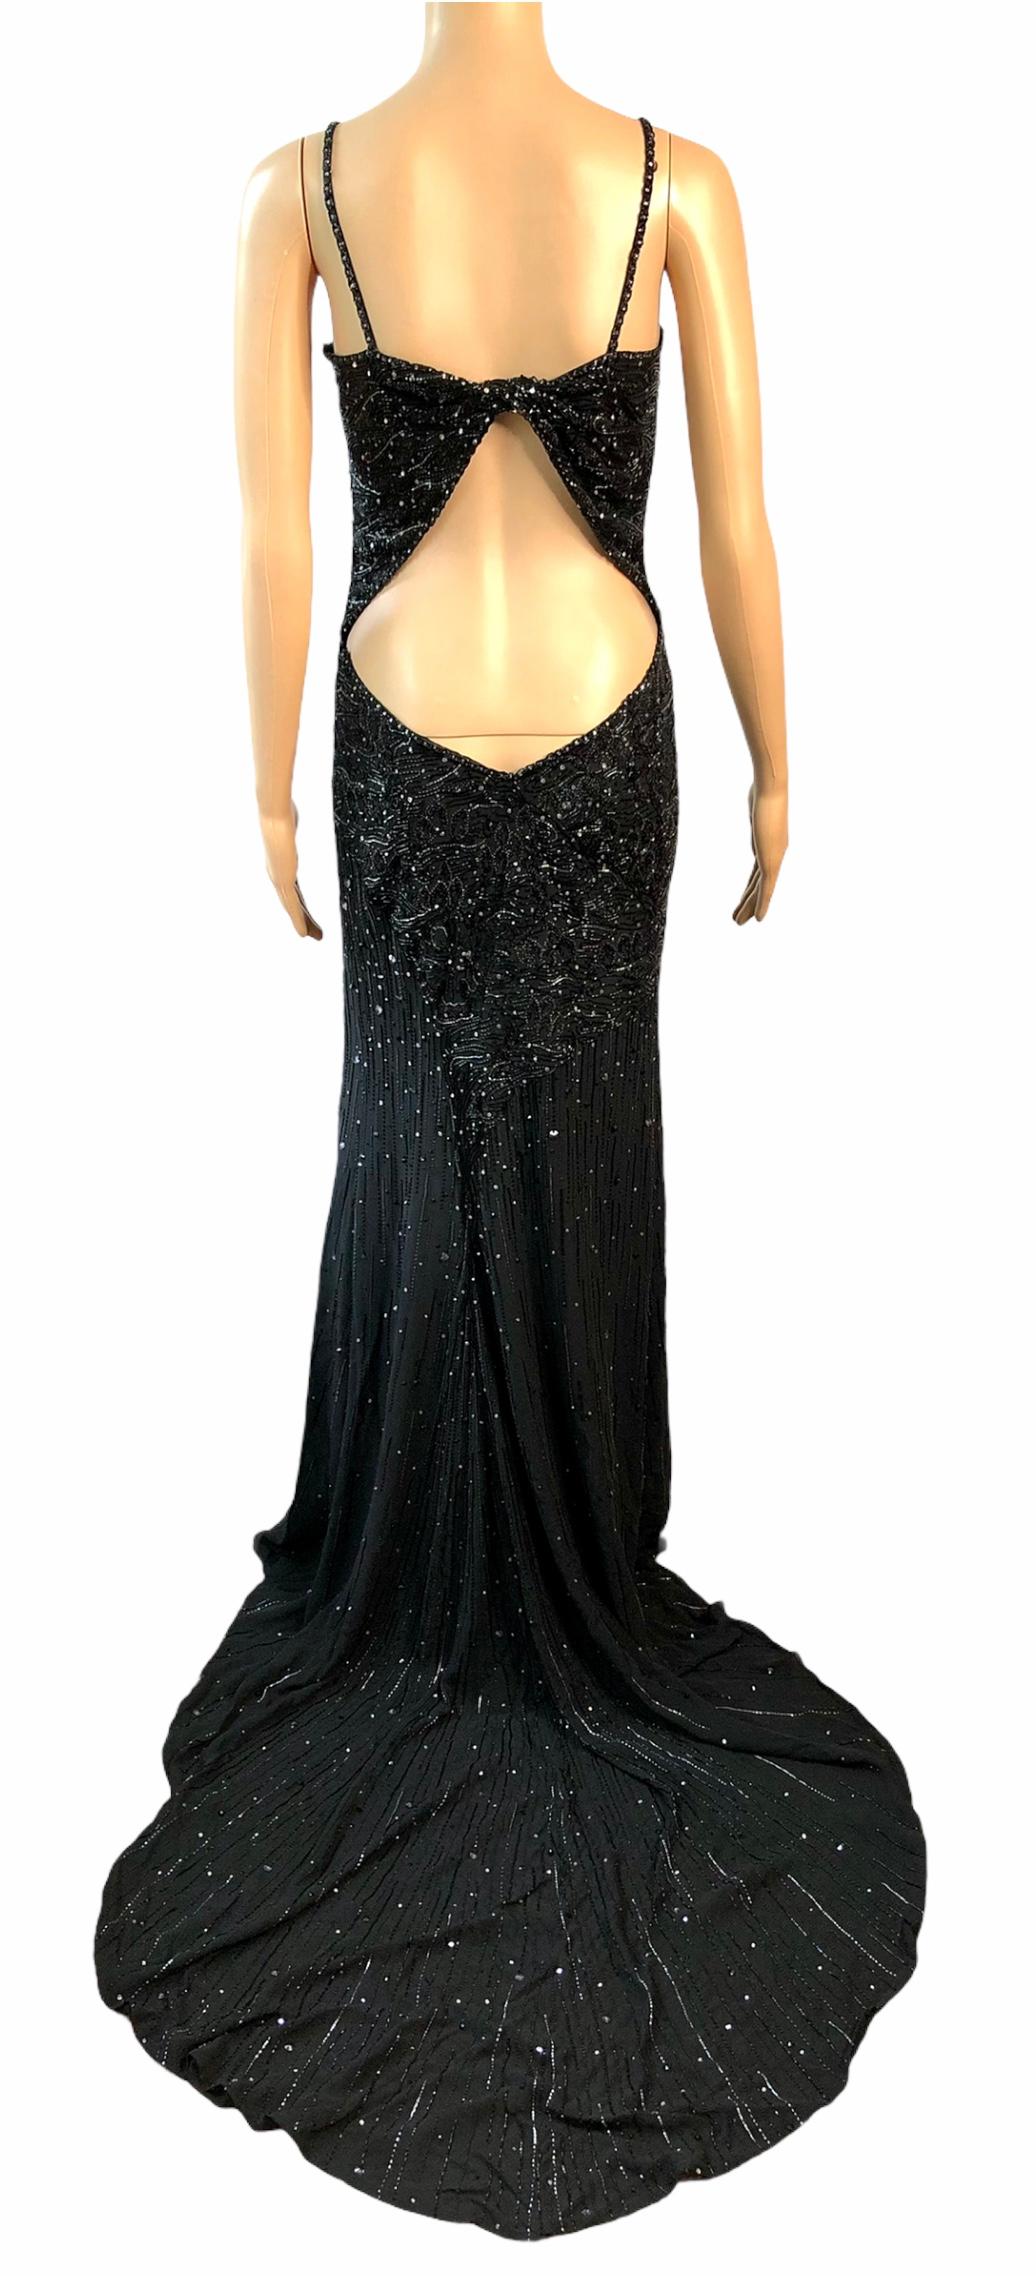 Atelier Versace Haute Couture F/W 1998 Crystal Embellished Cutout Train Gown For Sale 5